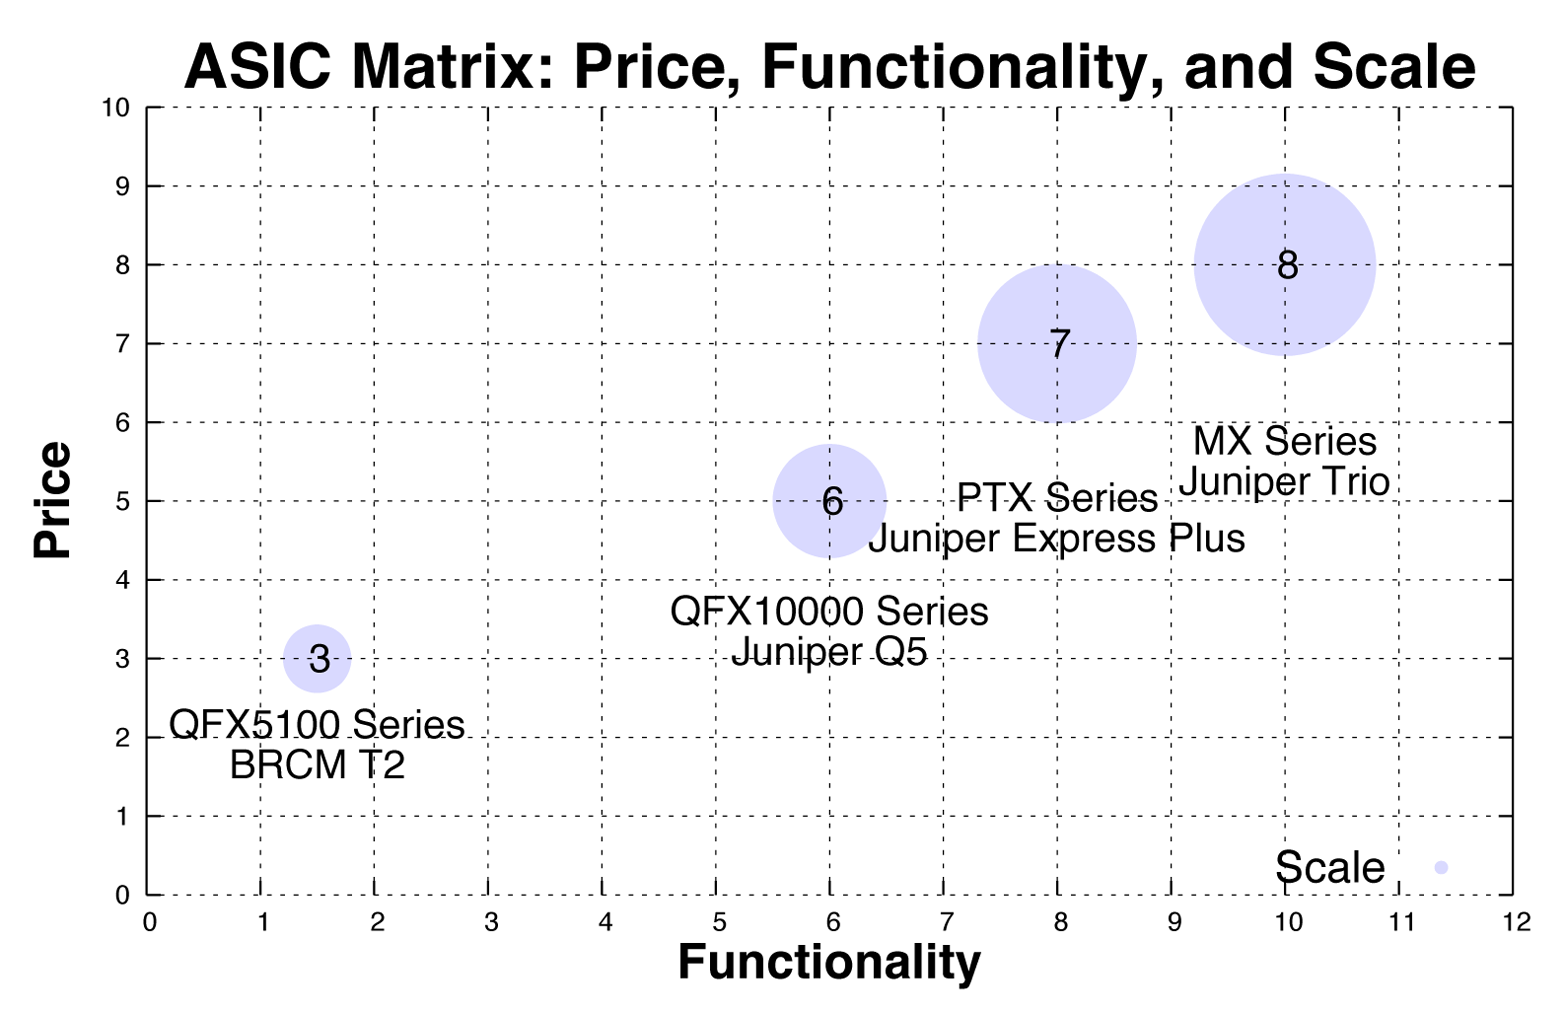 Juniper matrix of price, functionality, and scale